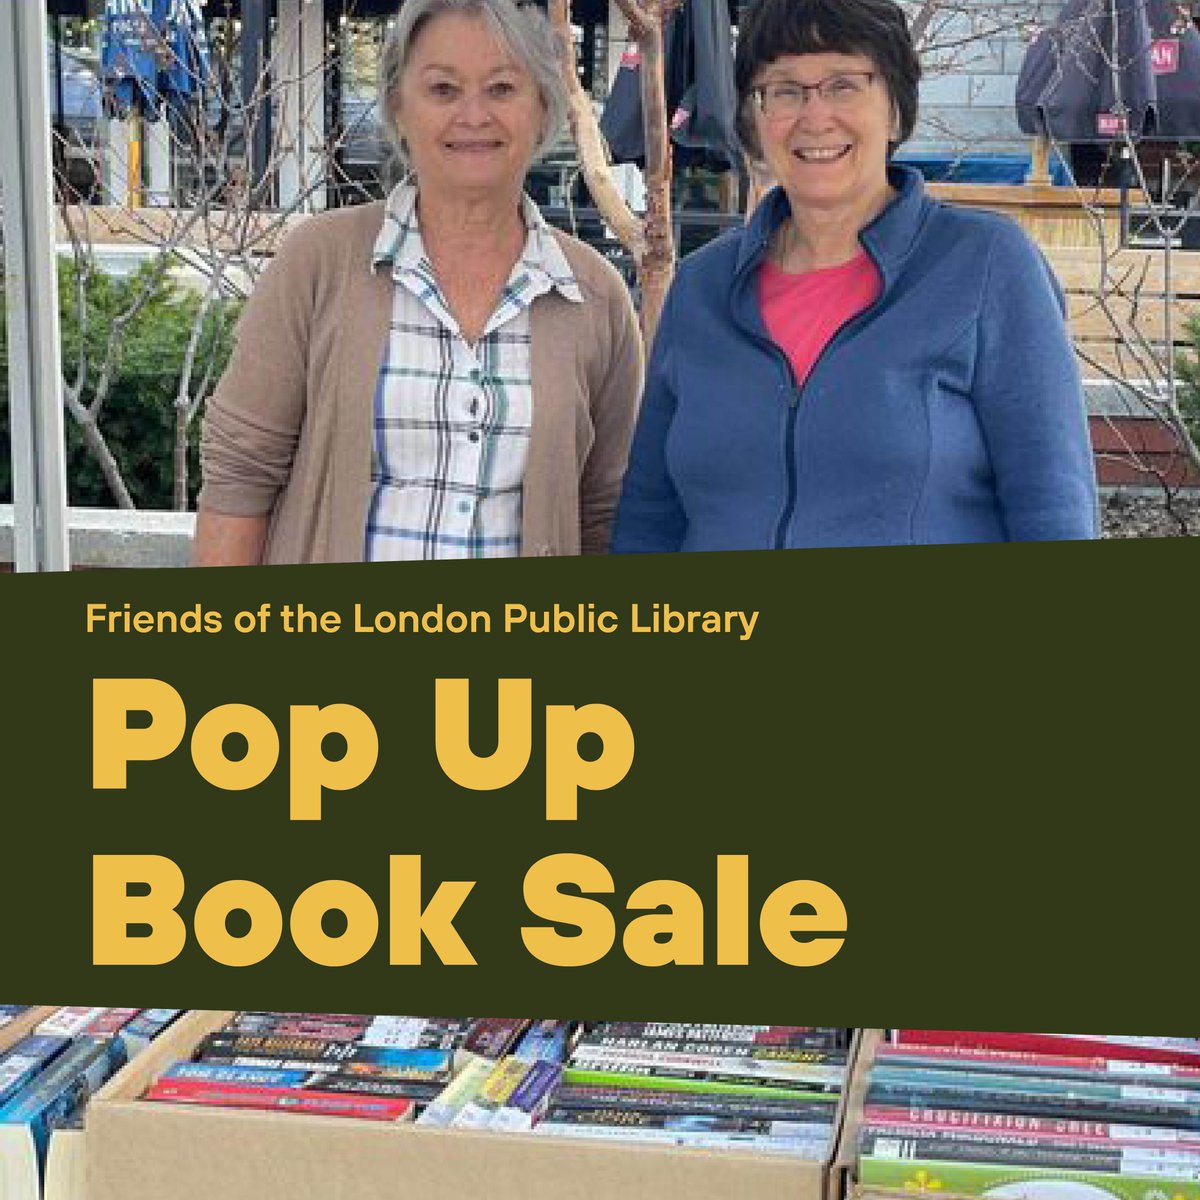 TODAY!  @LPL_Friends are holding their first Pop Up Book Sale of 2024 outside @CoventMarket from 8am-1pm, rain or shine!

Used books for every age and interest. Cash or credit. 

👀 Look for more Pop Up Book Sales coming soon!